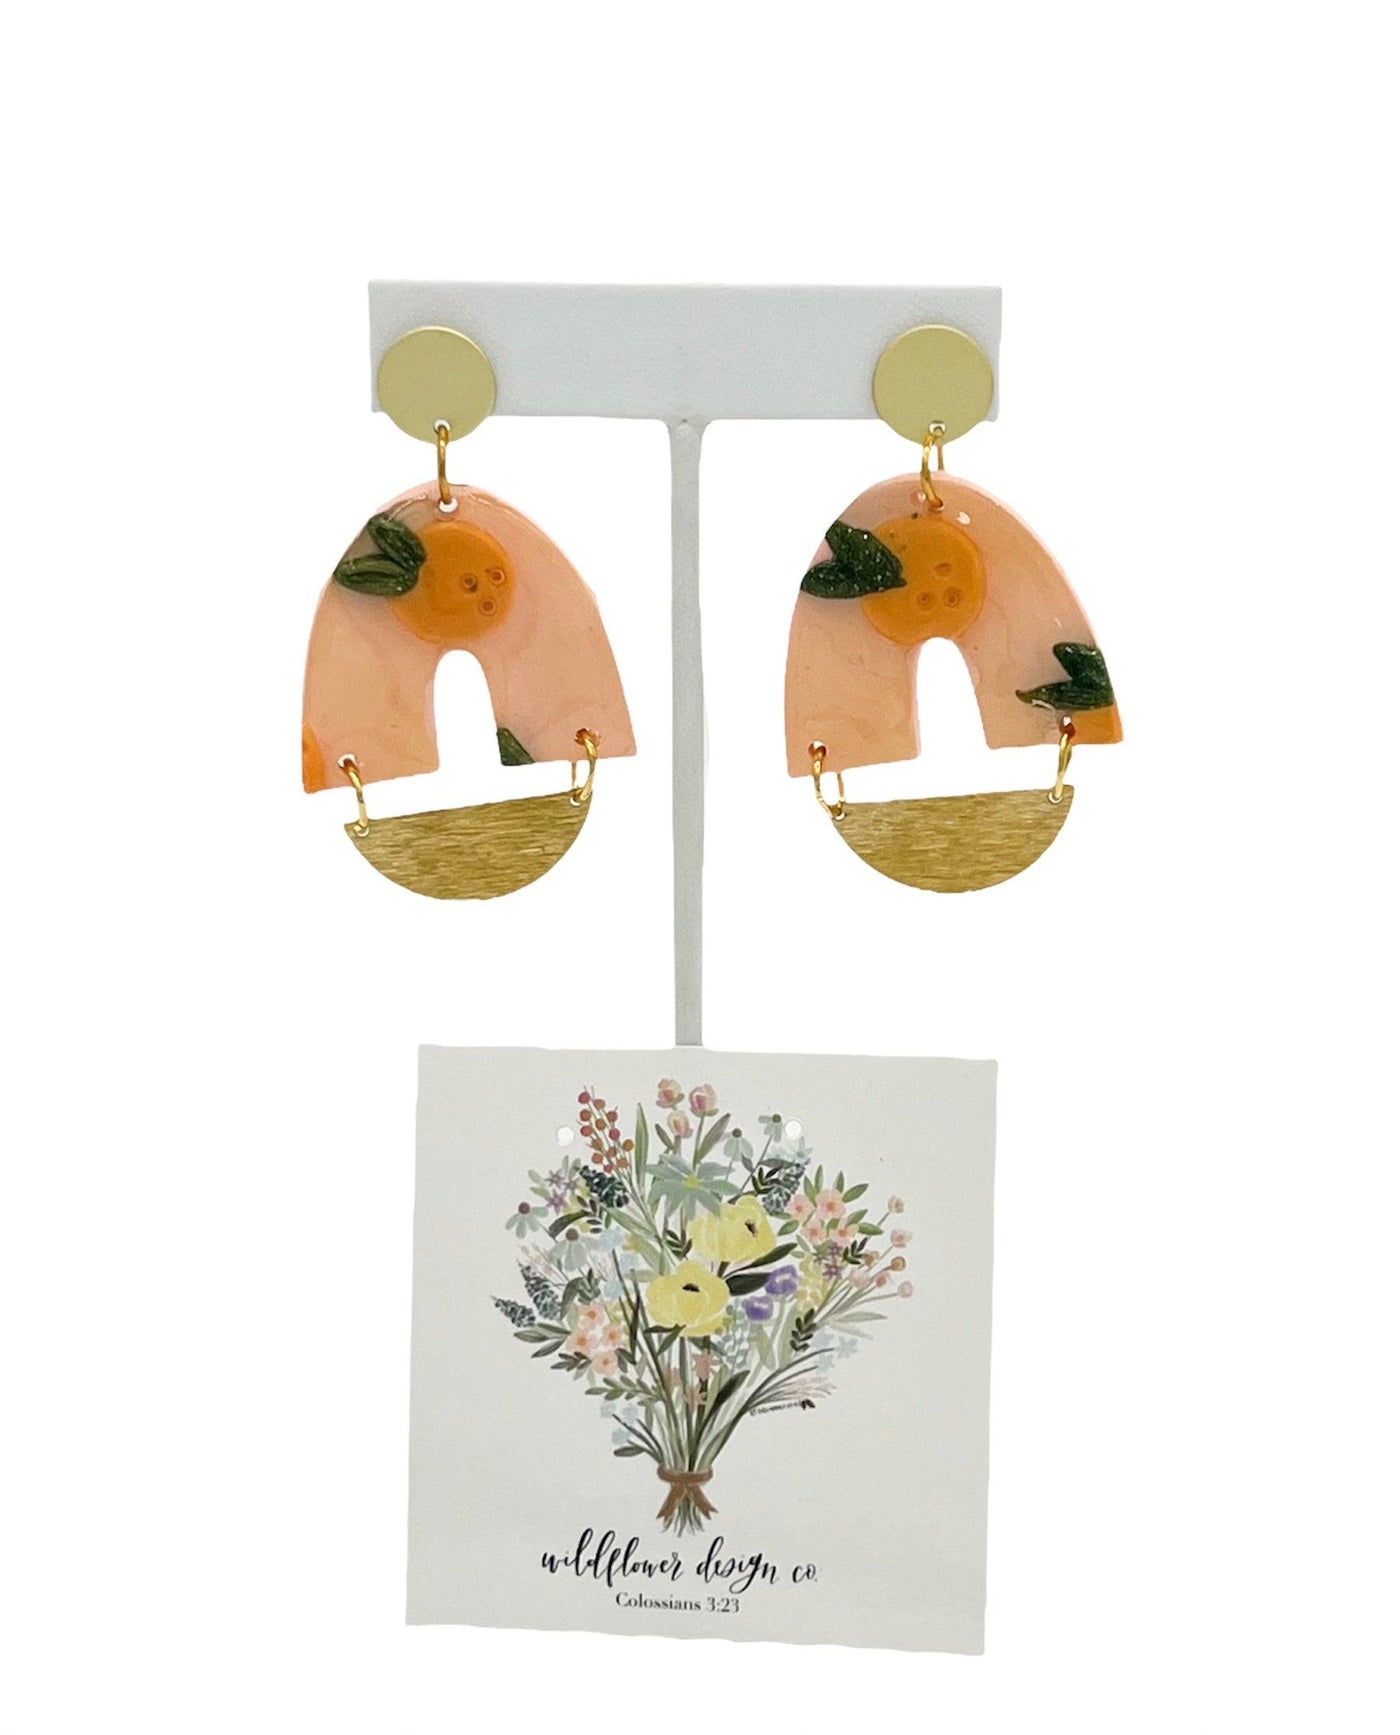 Handcrafted peach earrings with gold accents